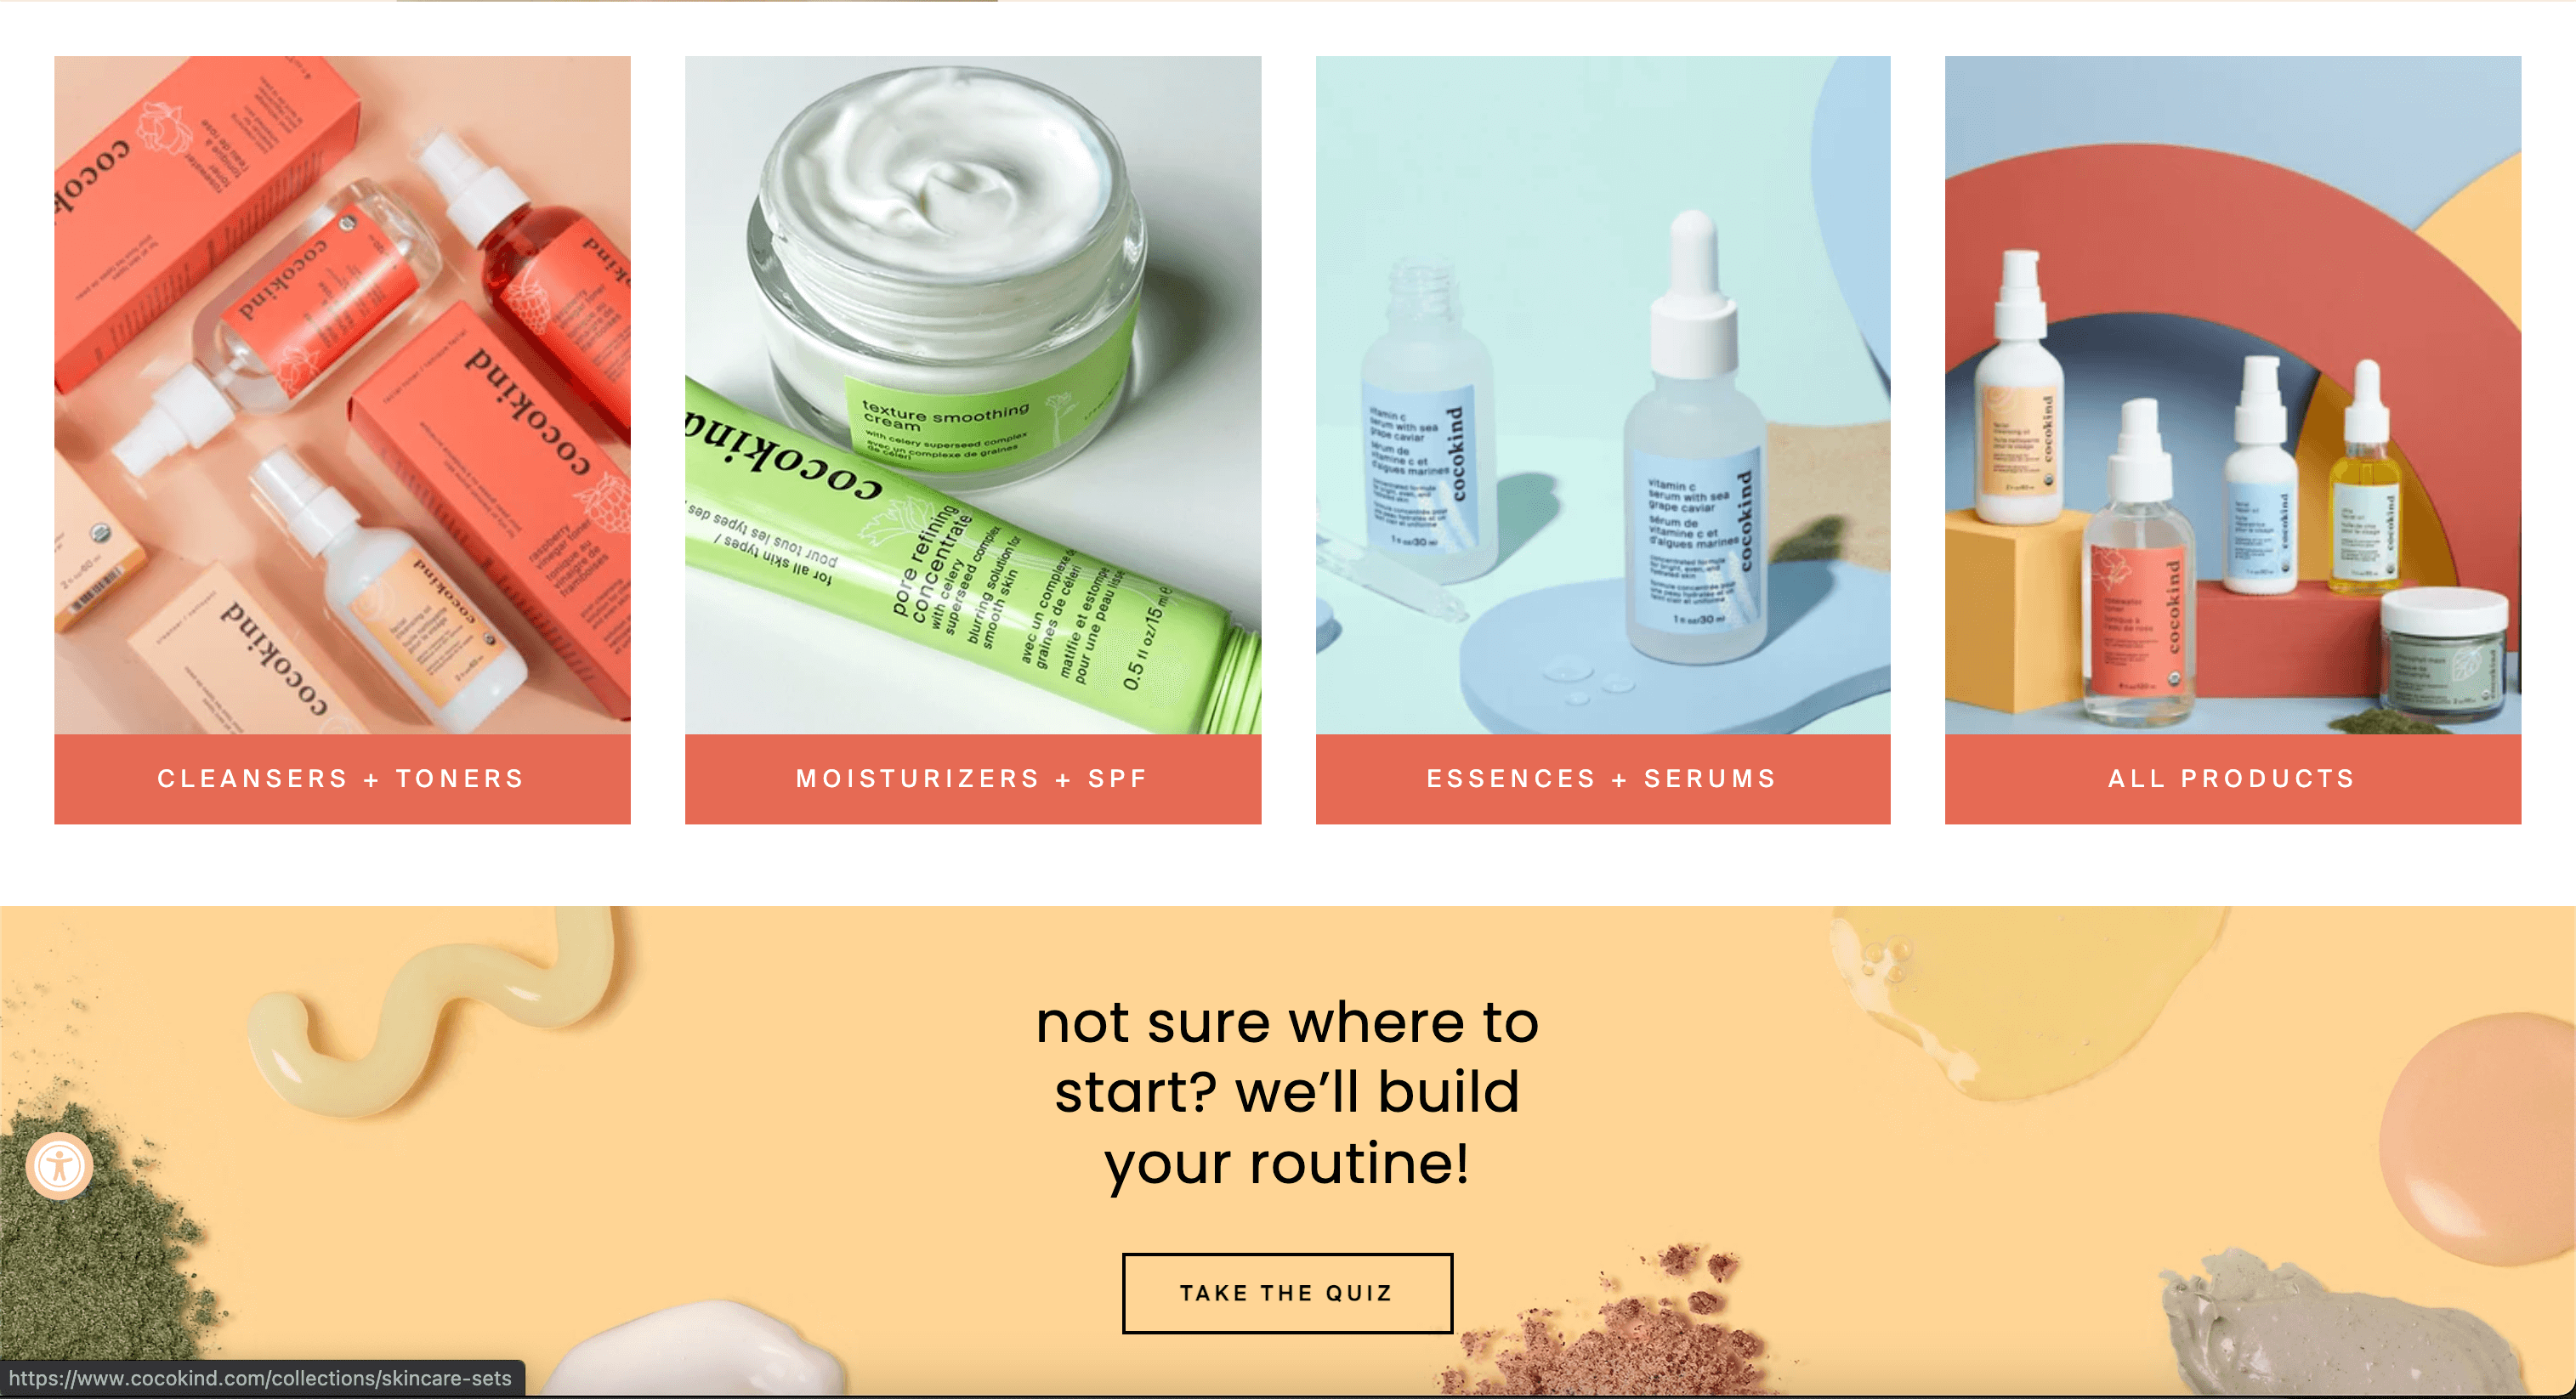 The homepage for CocoKind skincare